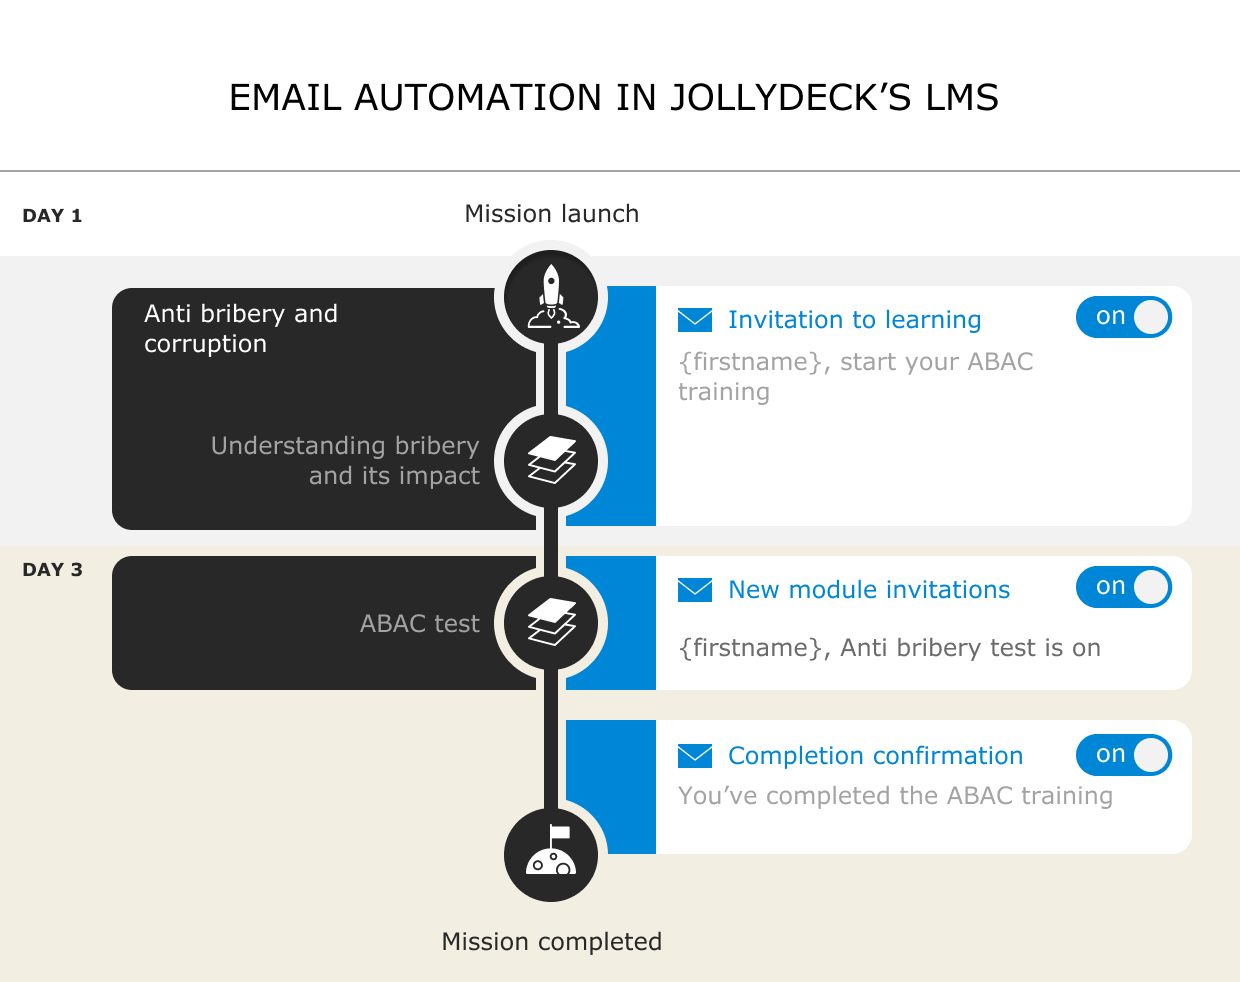 Email automation in JollyDeck LMS